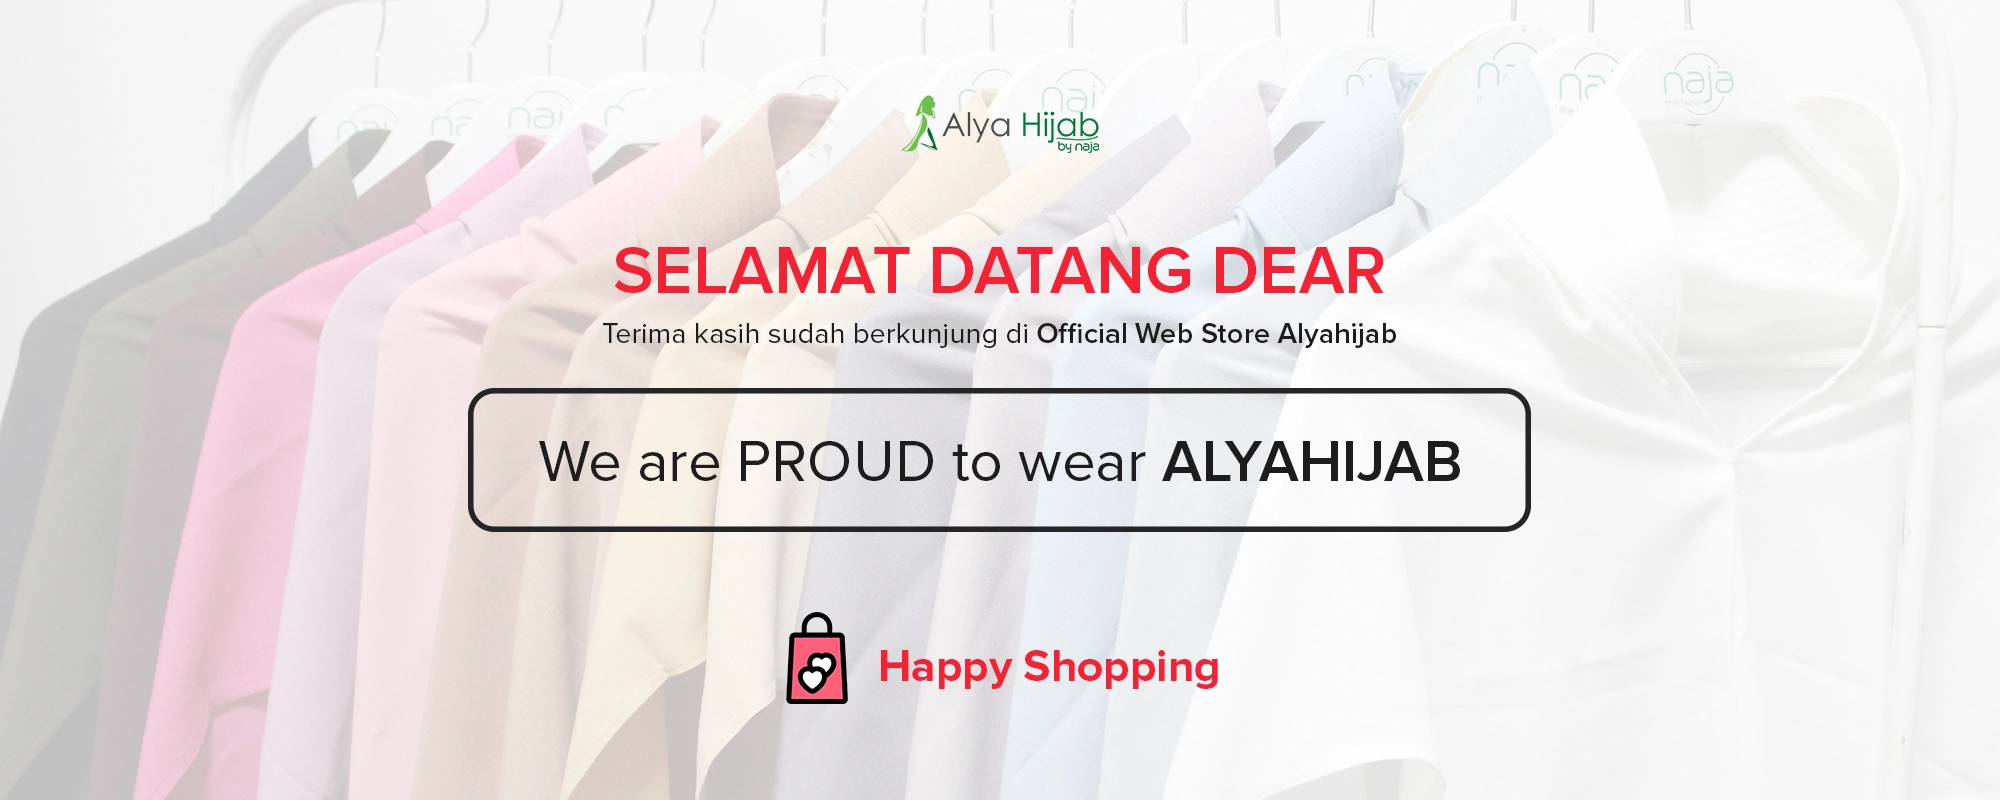 We are PROUD to wear ALYAHIJAB